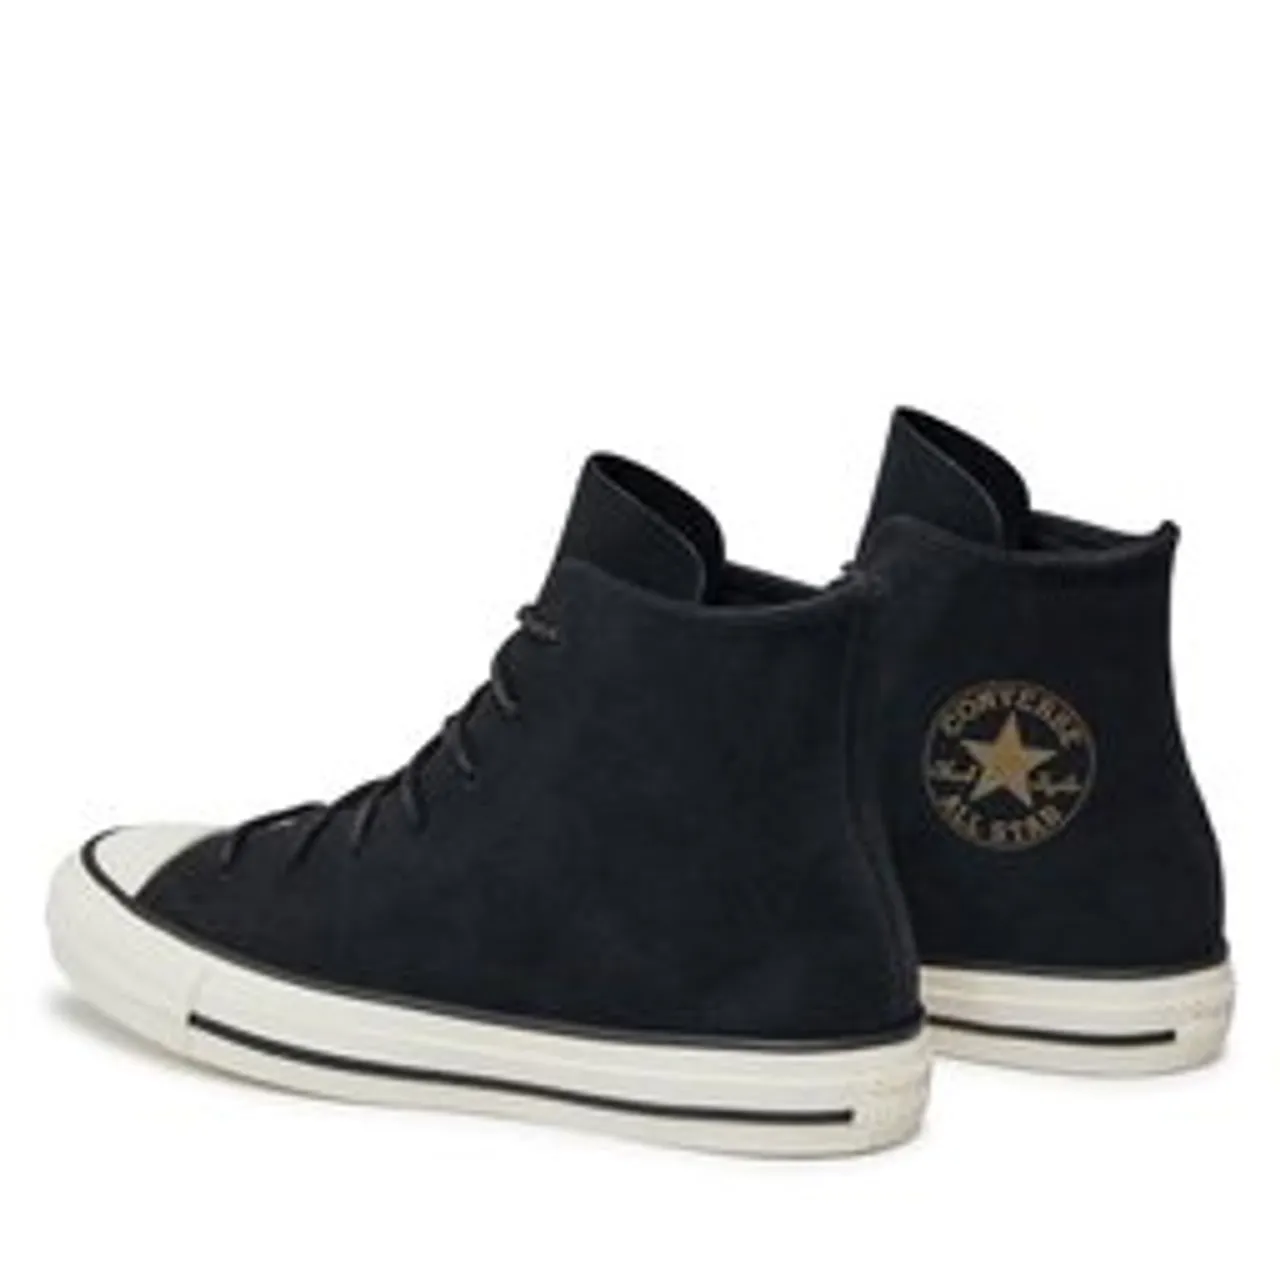 Sneakers aus Stoff Converse Chuck Taylor All Star A04637C Black